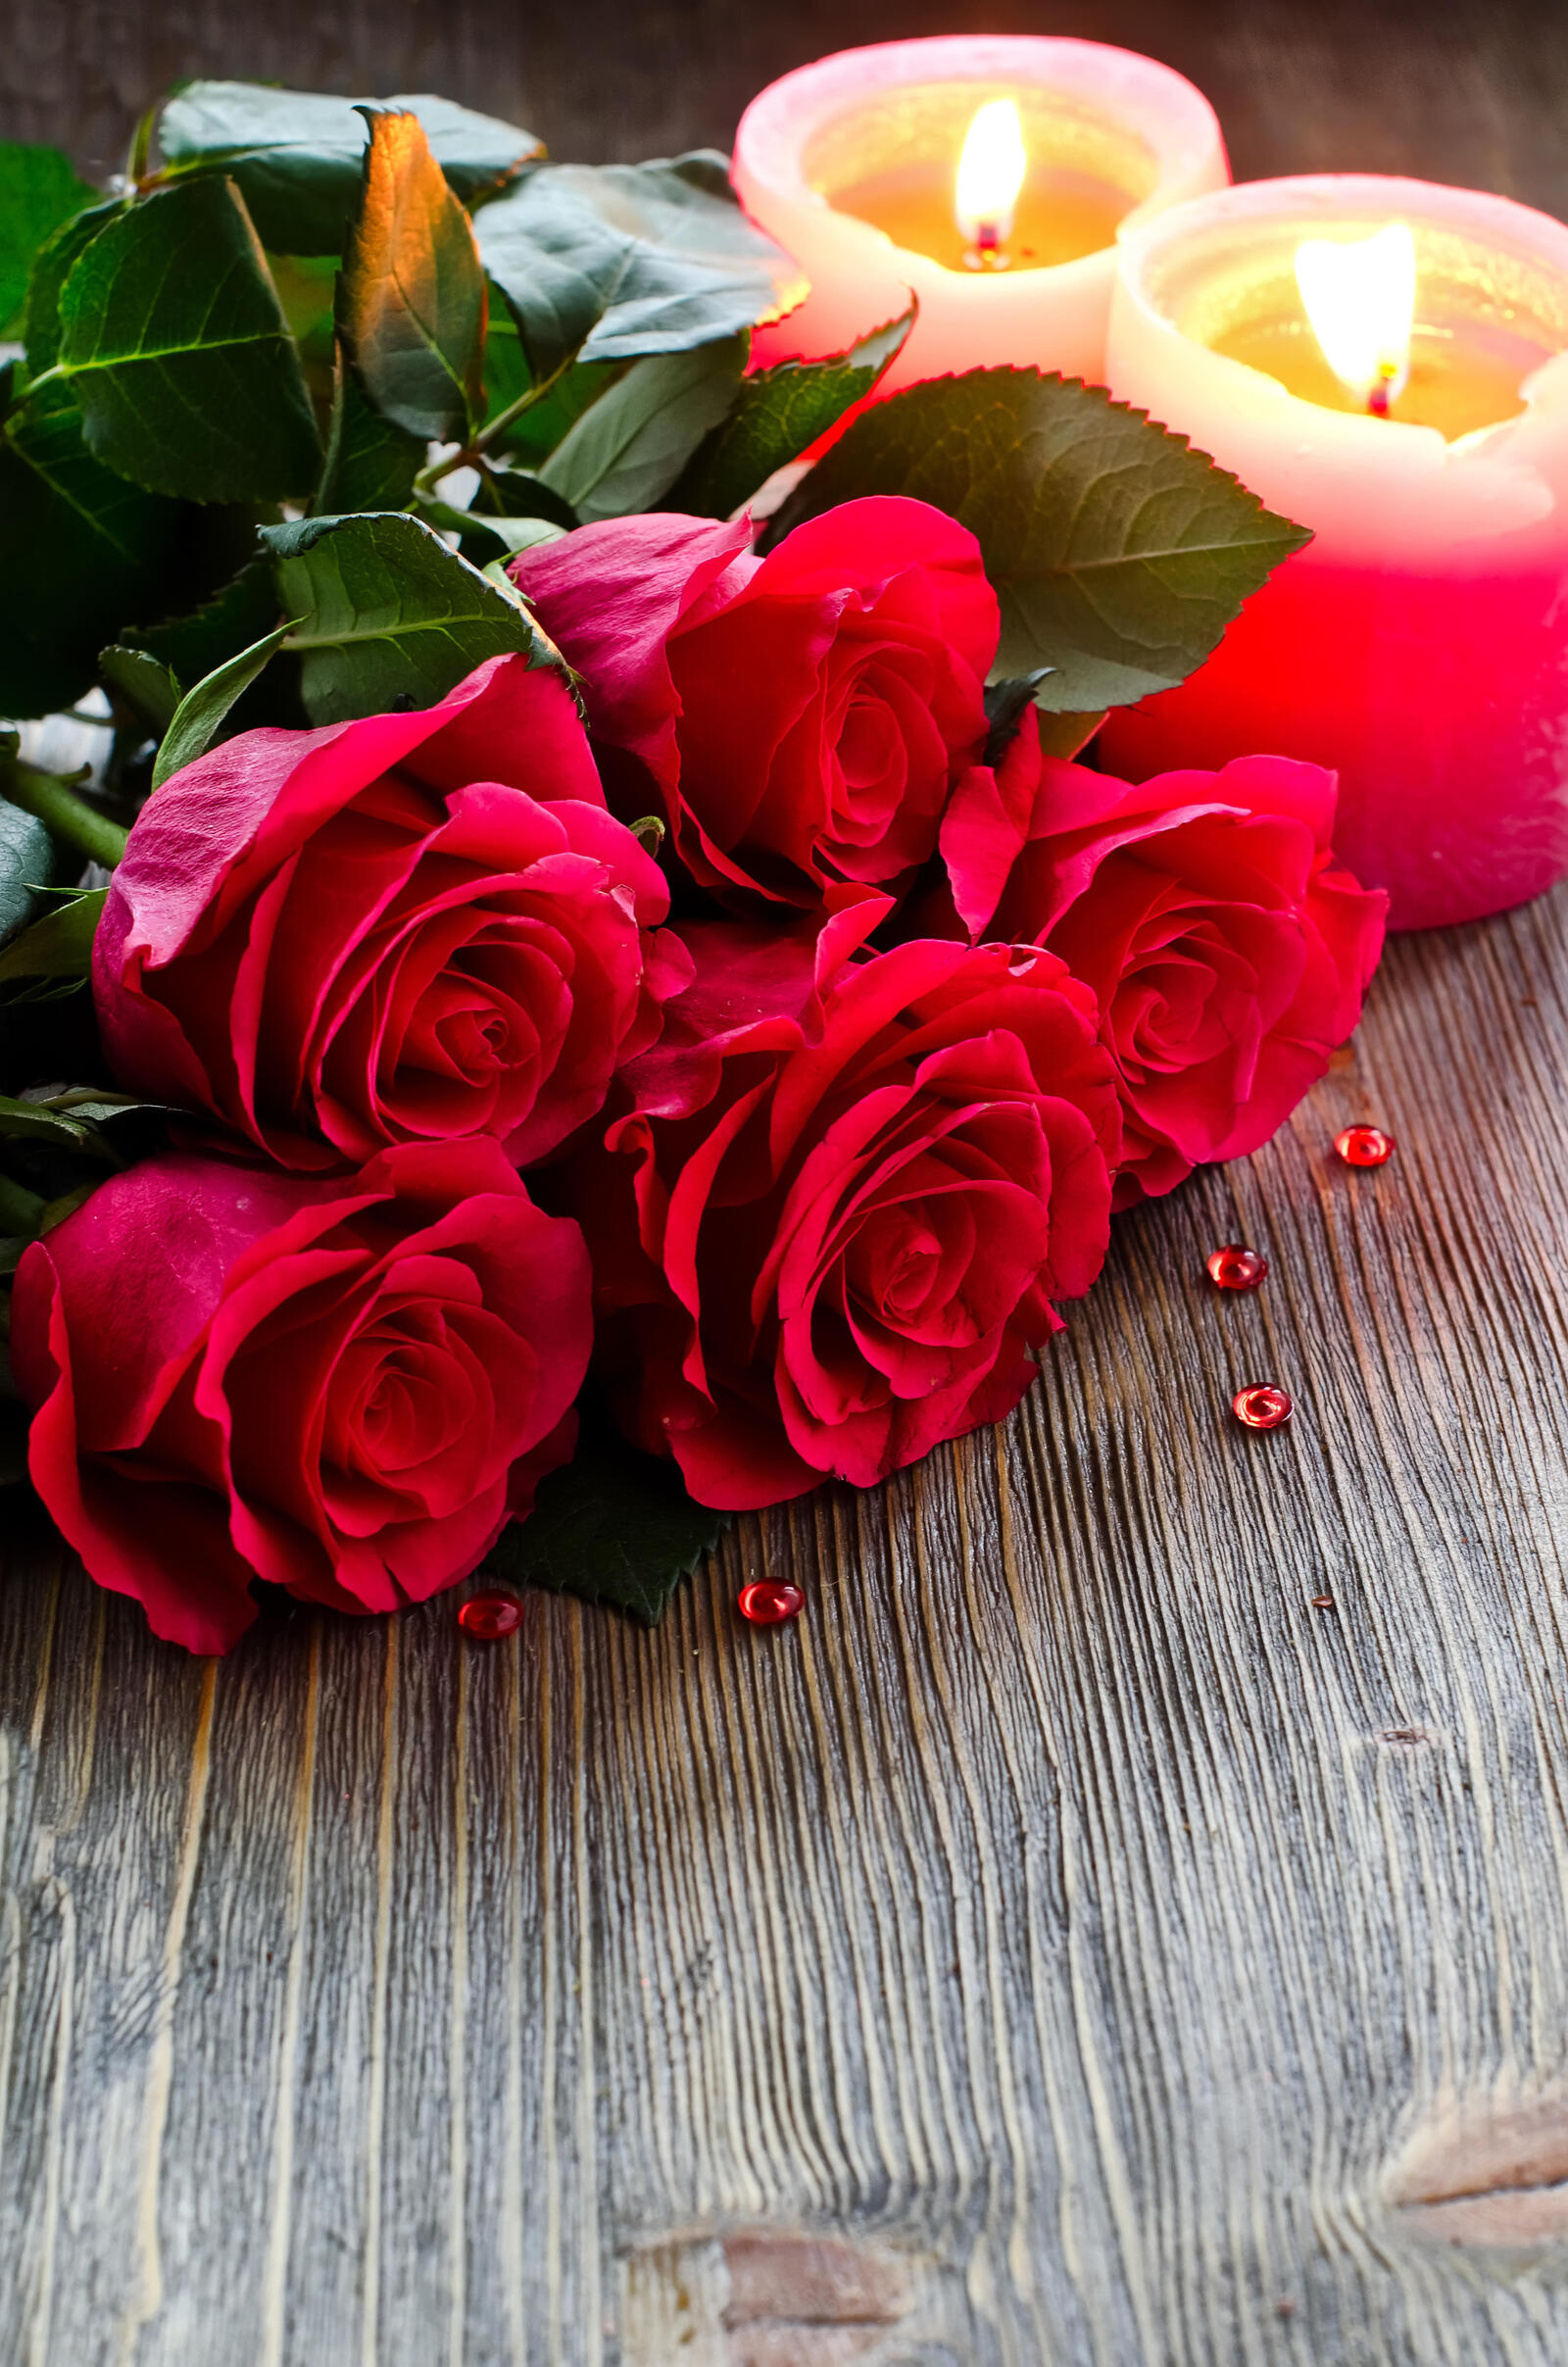 Free photo A bouquet of red roses next to burning candles